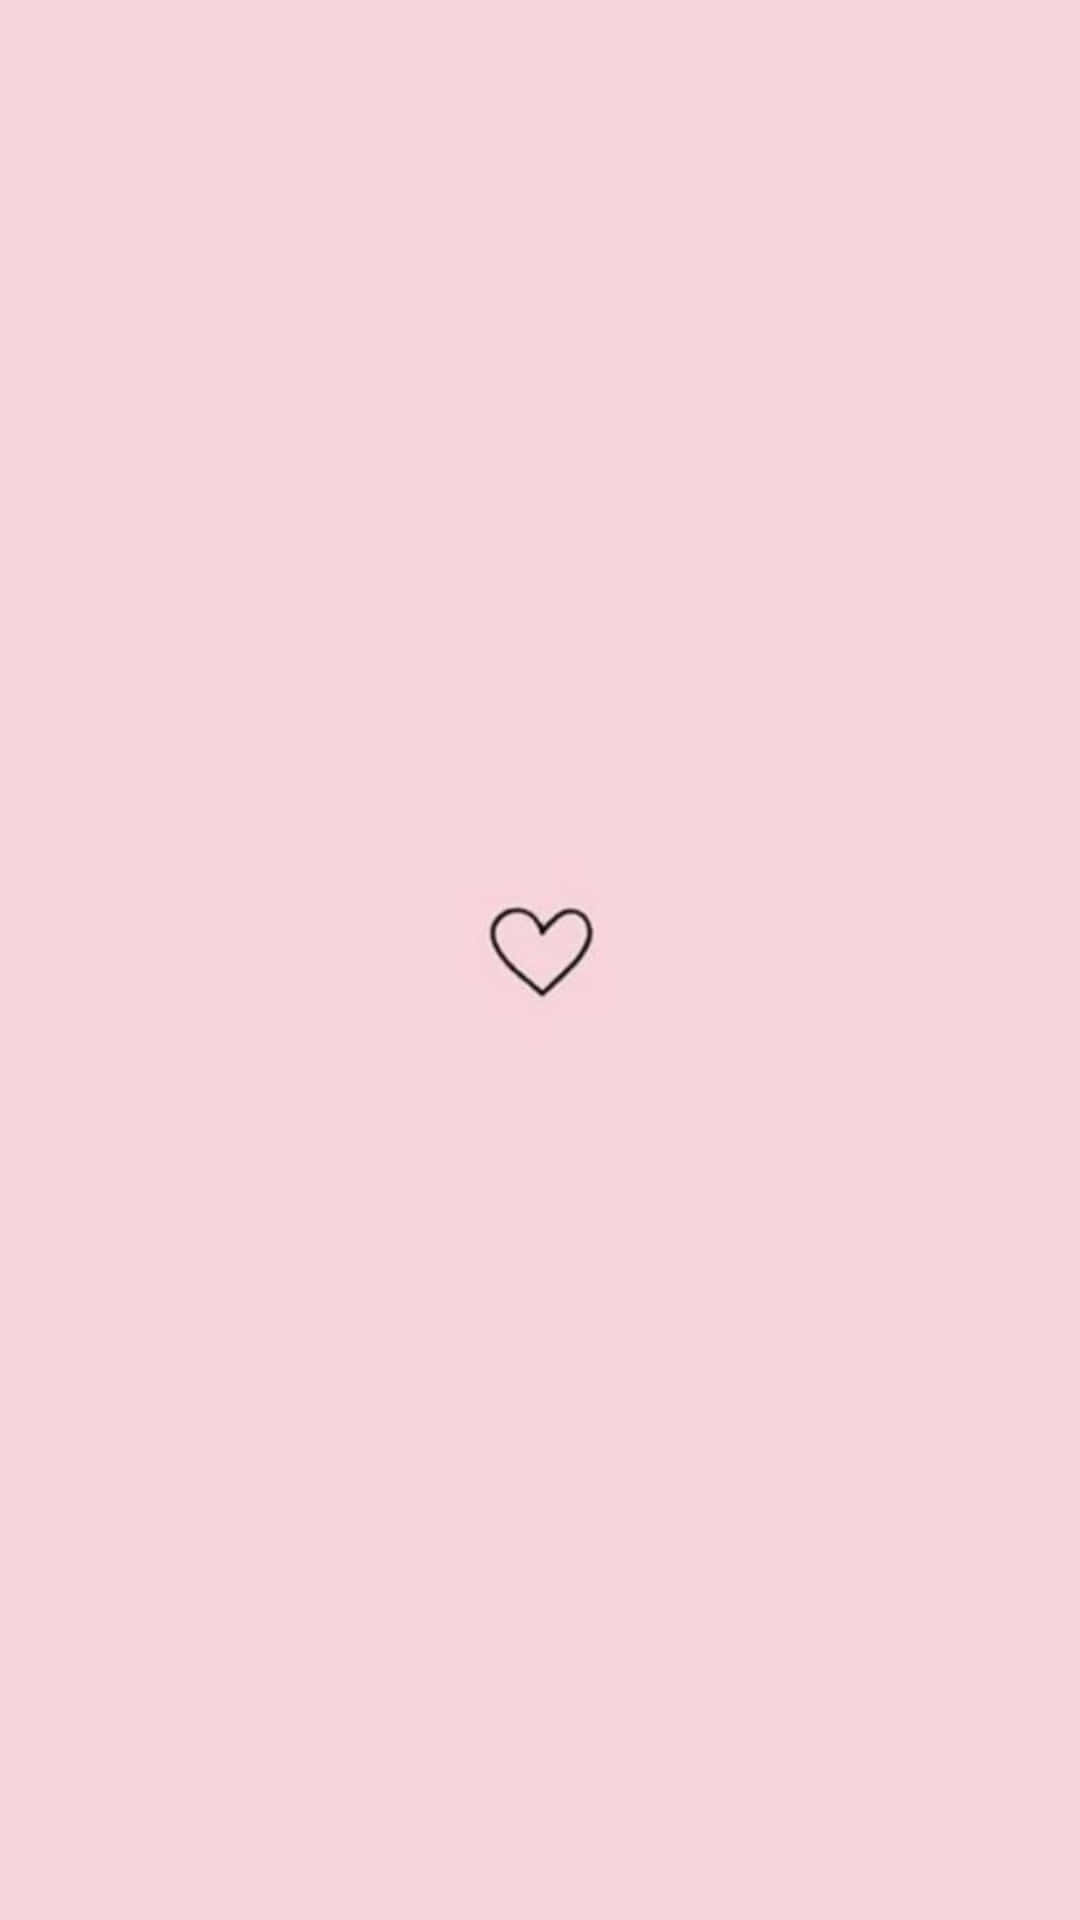 Download A Pink Background With A Heart On It | Wallpapers.com